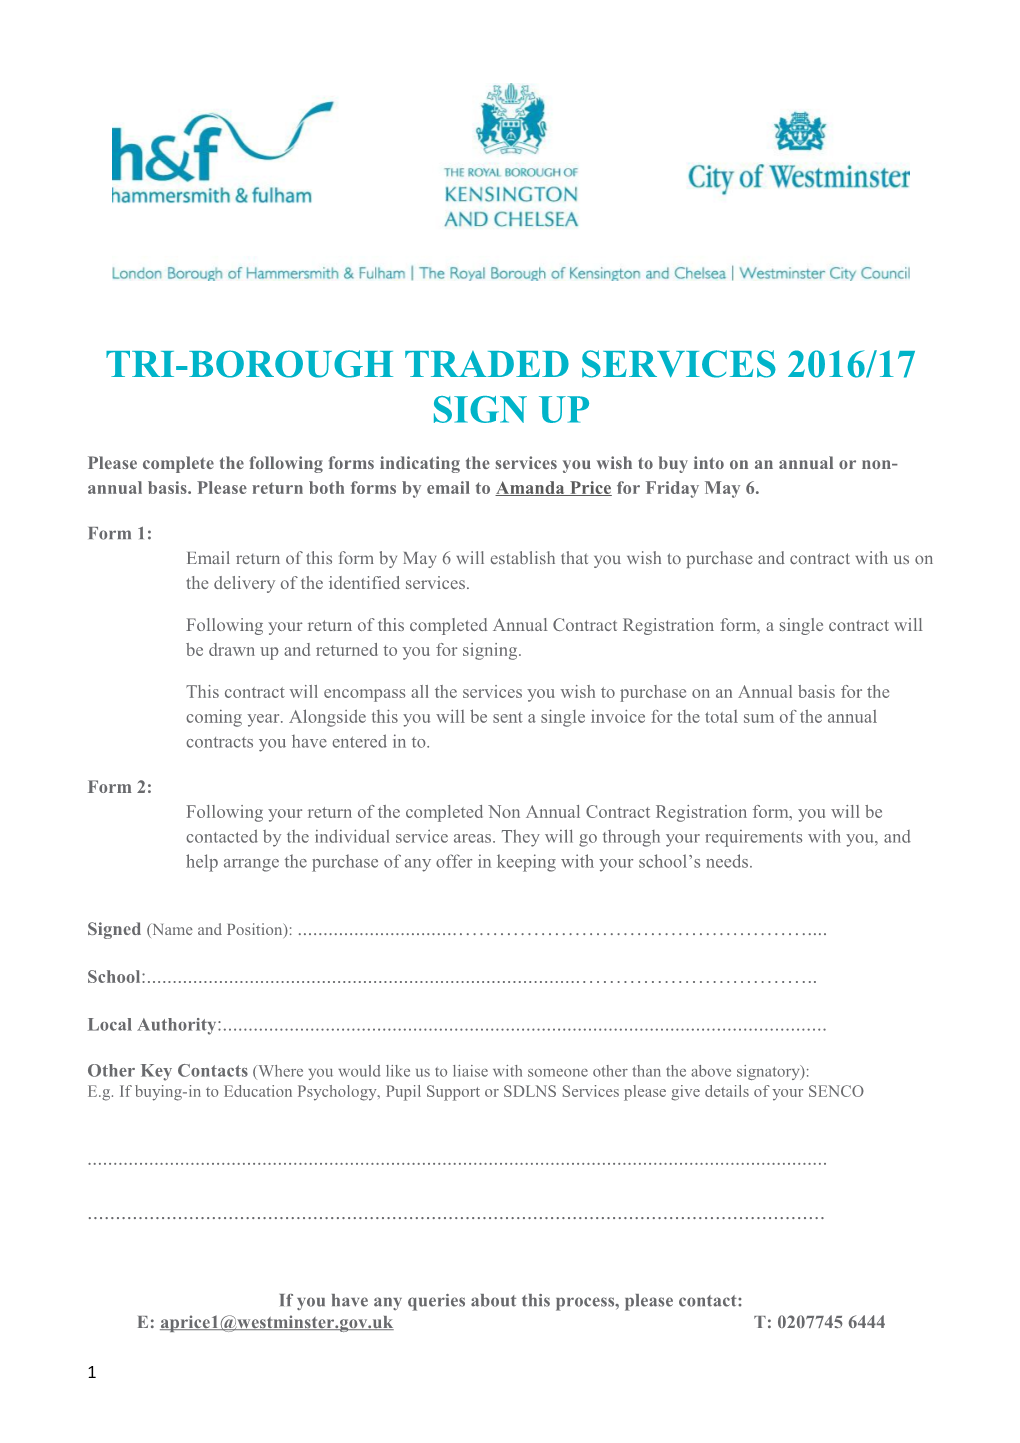 Tri-Borough Traded Services 2016/17 Sign Up